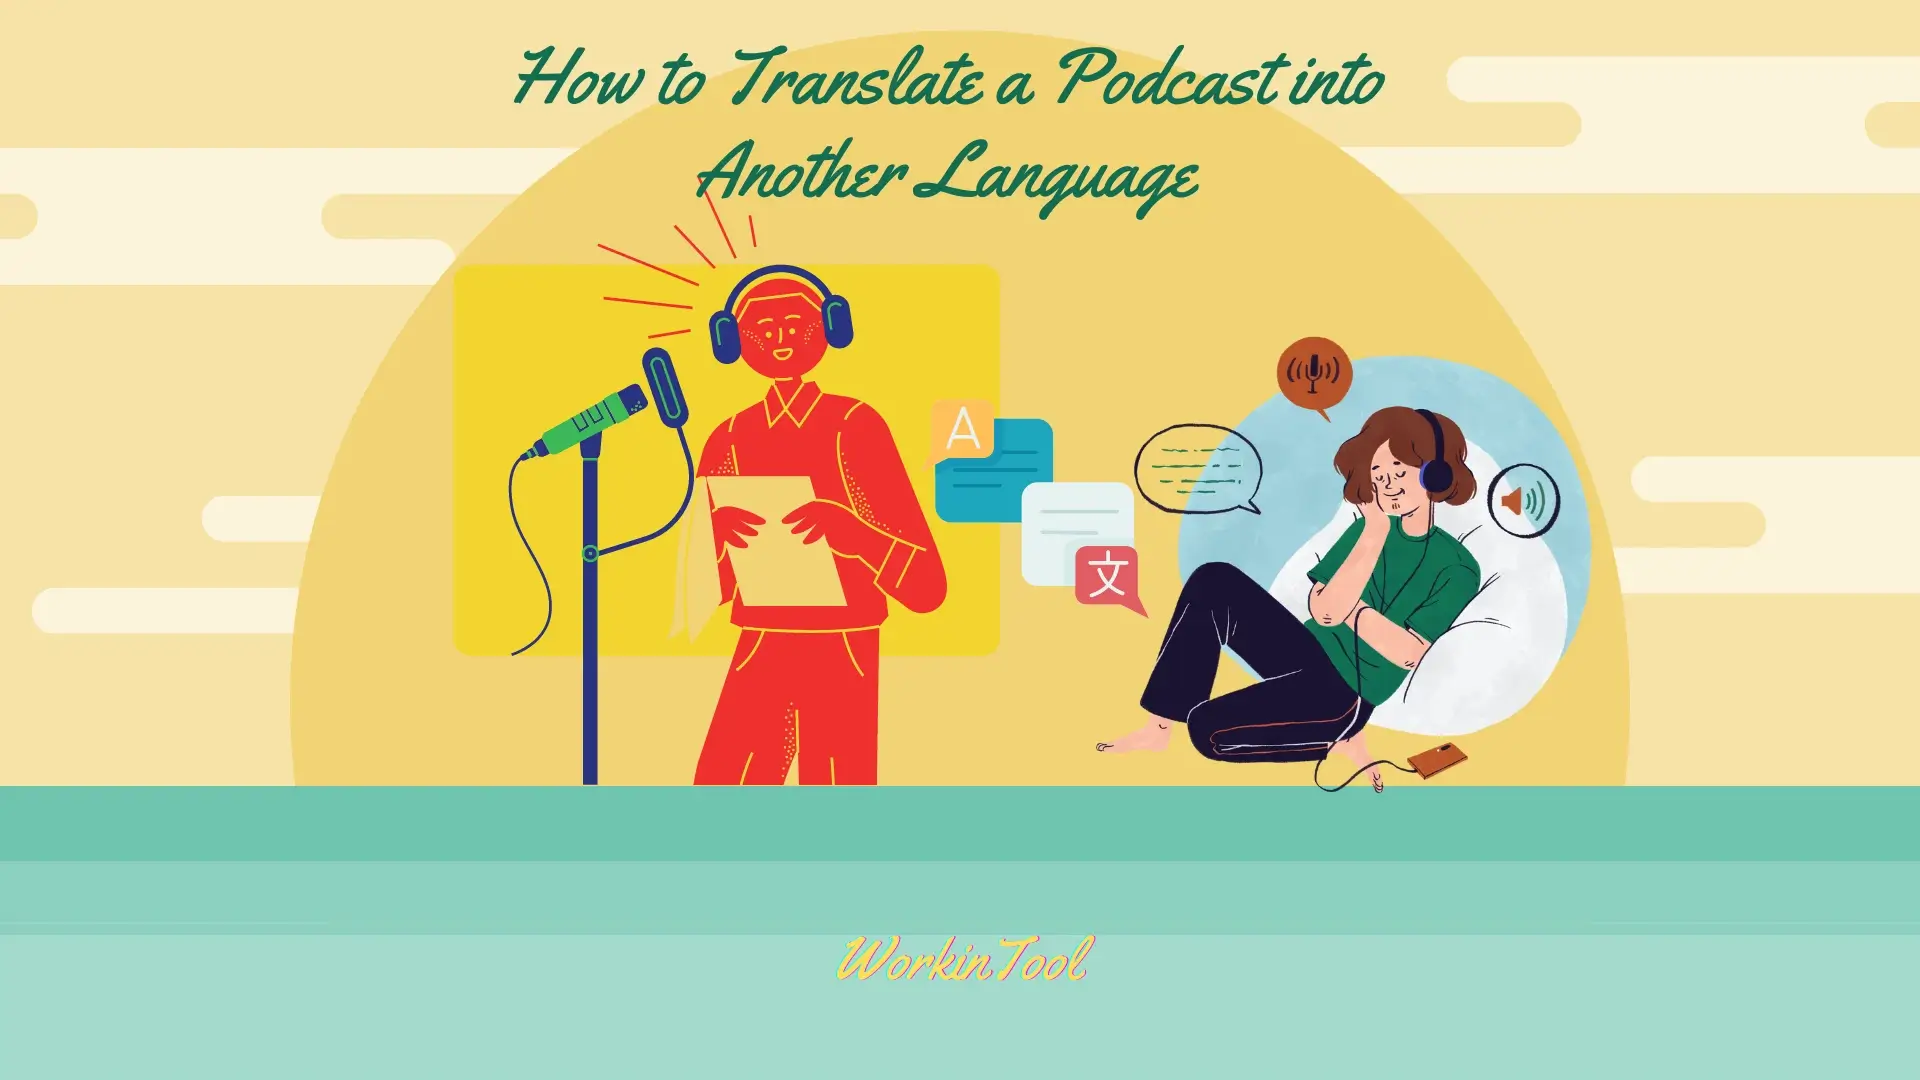 How to Translate a Podcast into Another Language on PC